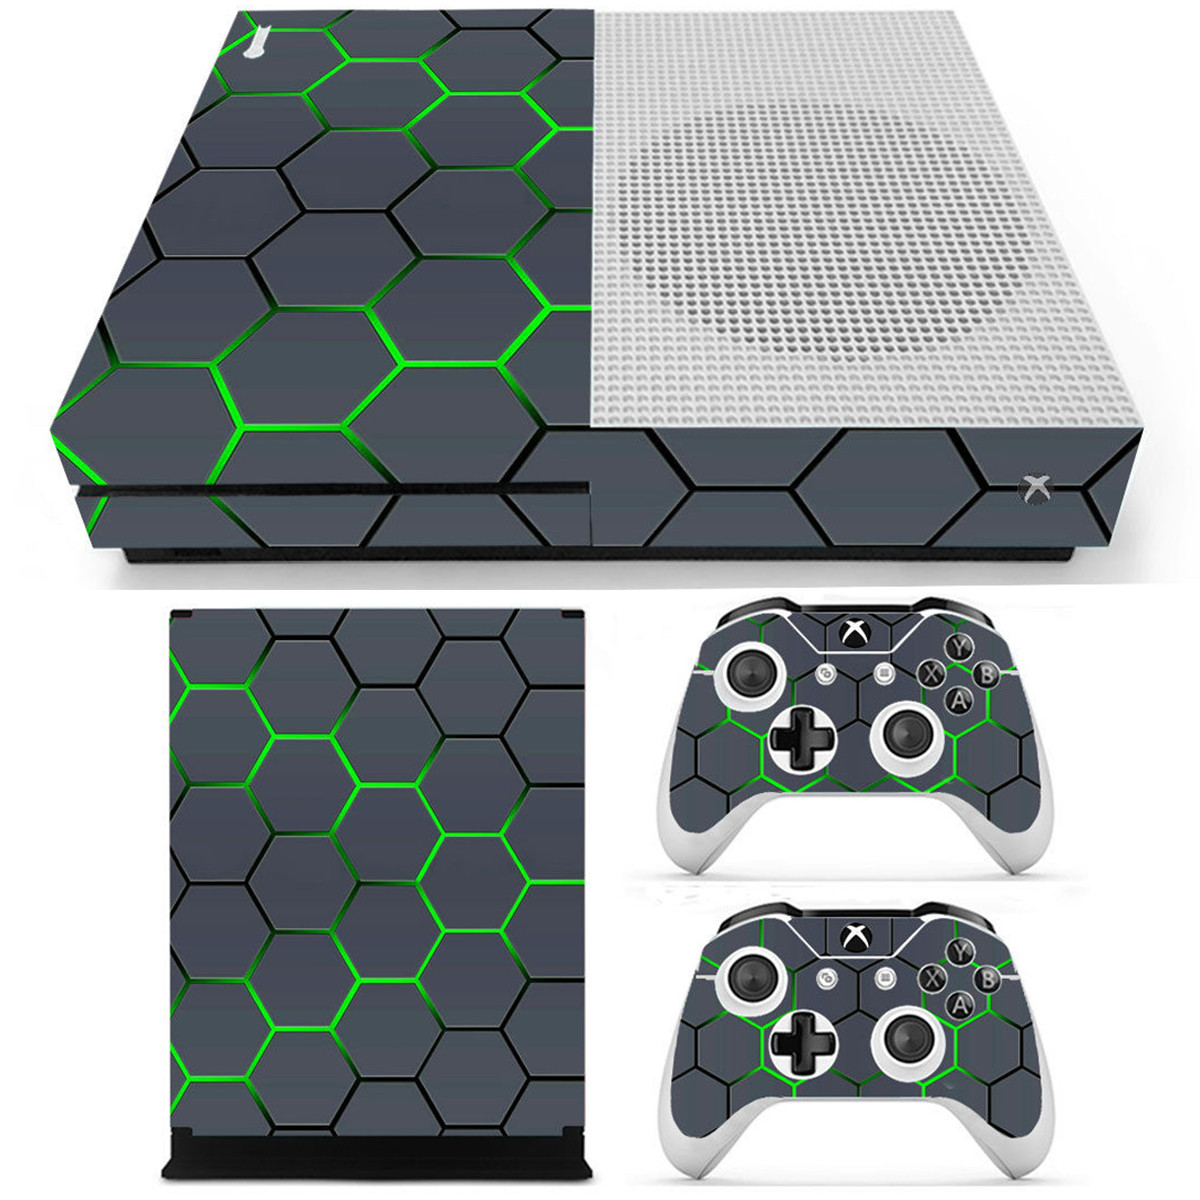 Green Grid Vinyl Decal Skin Stickers Cover for Xbox One S Game Console&2 Controllers 11